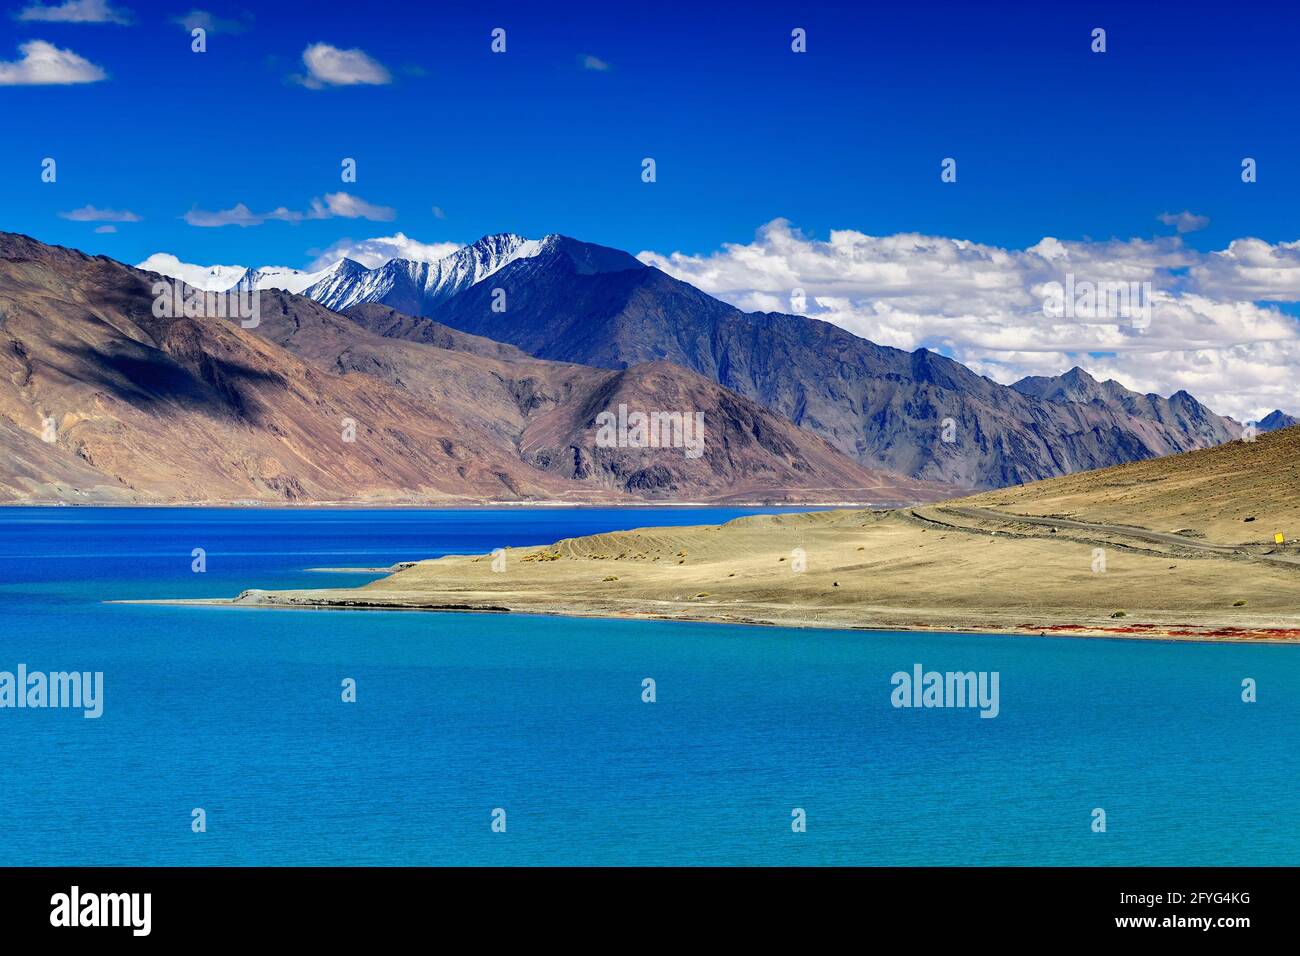 Mountains and Pangong tso (Lake). It is huge lake in united territory of Ladakh, India, at India China border extends Tibet. Stock Photo